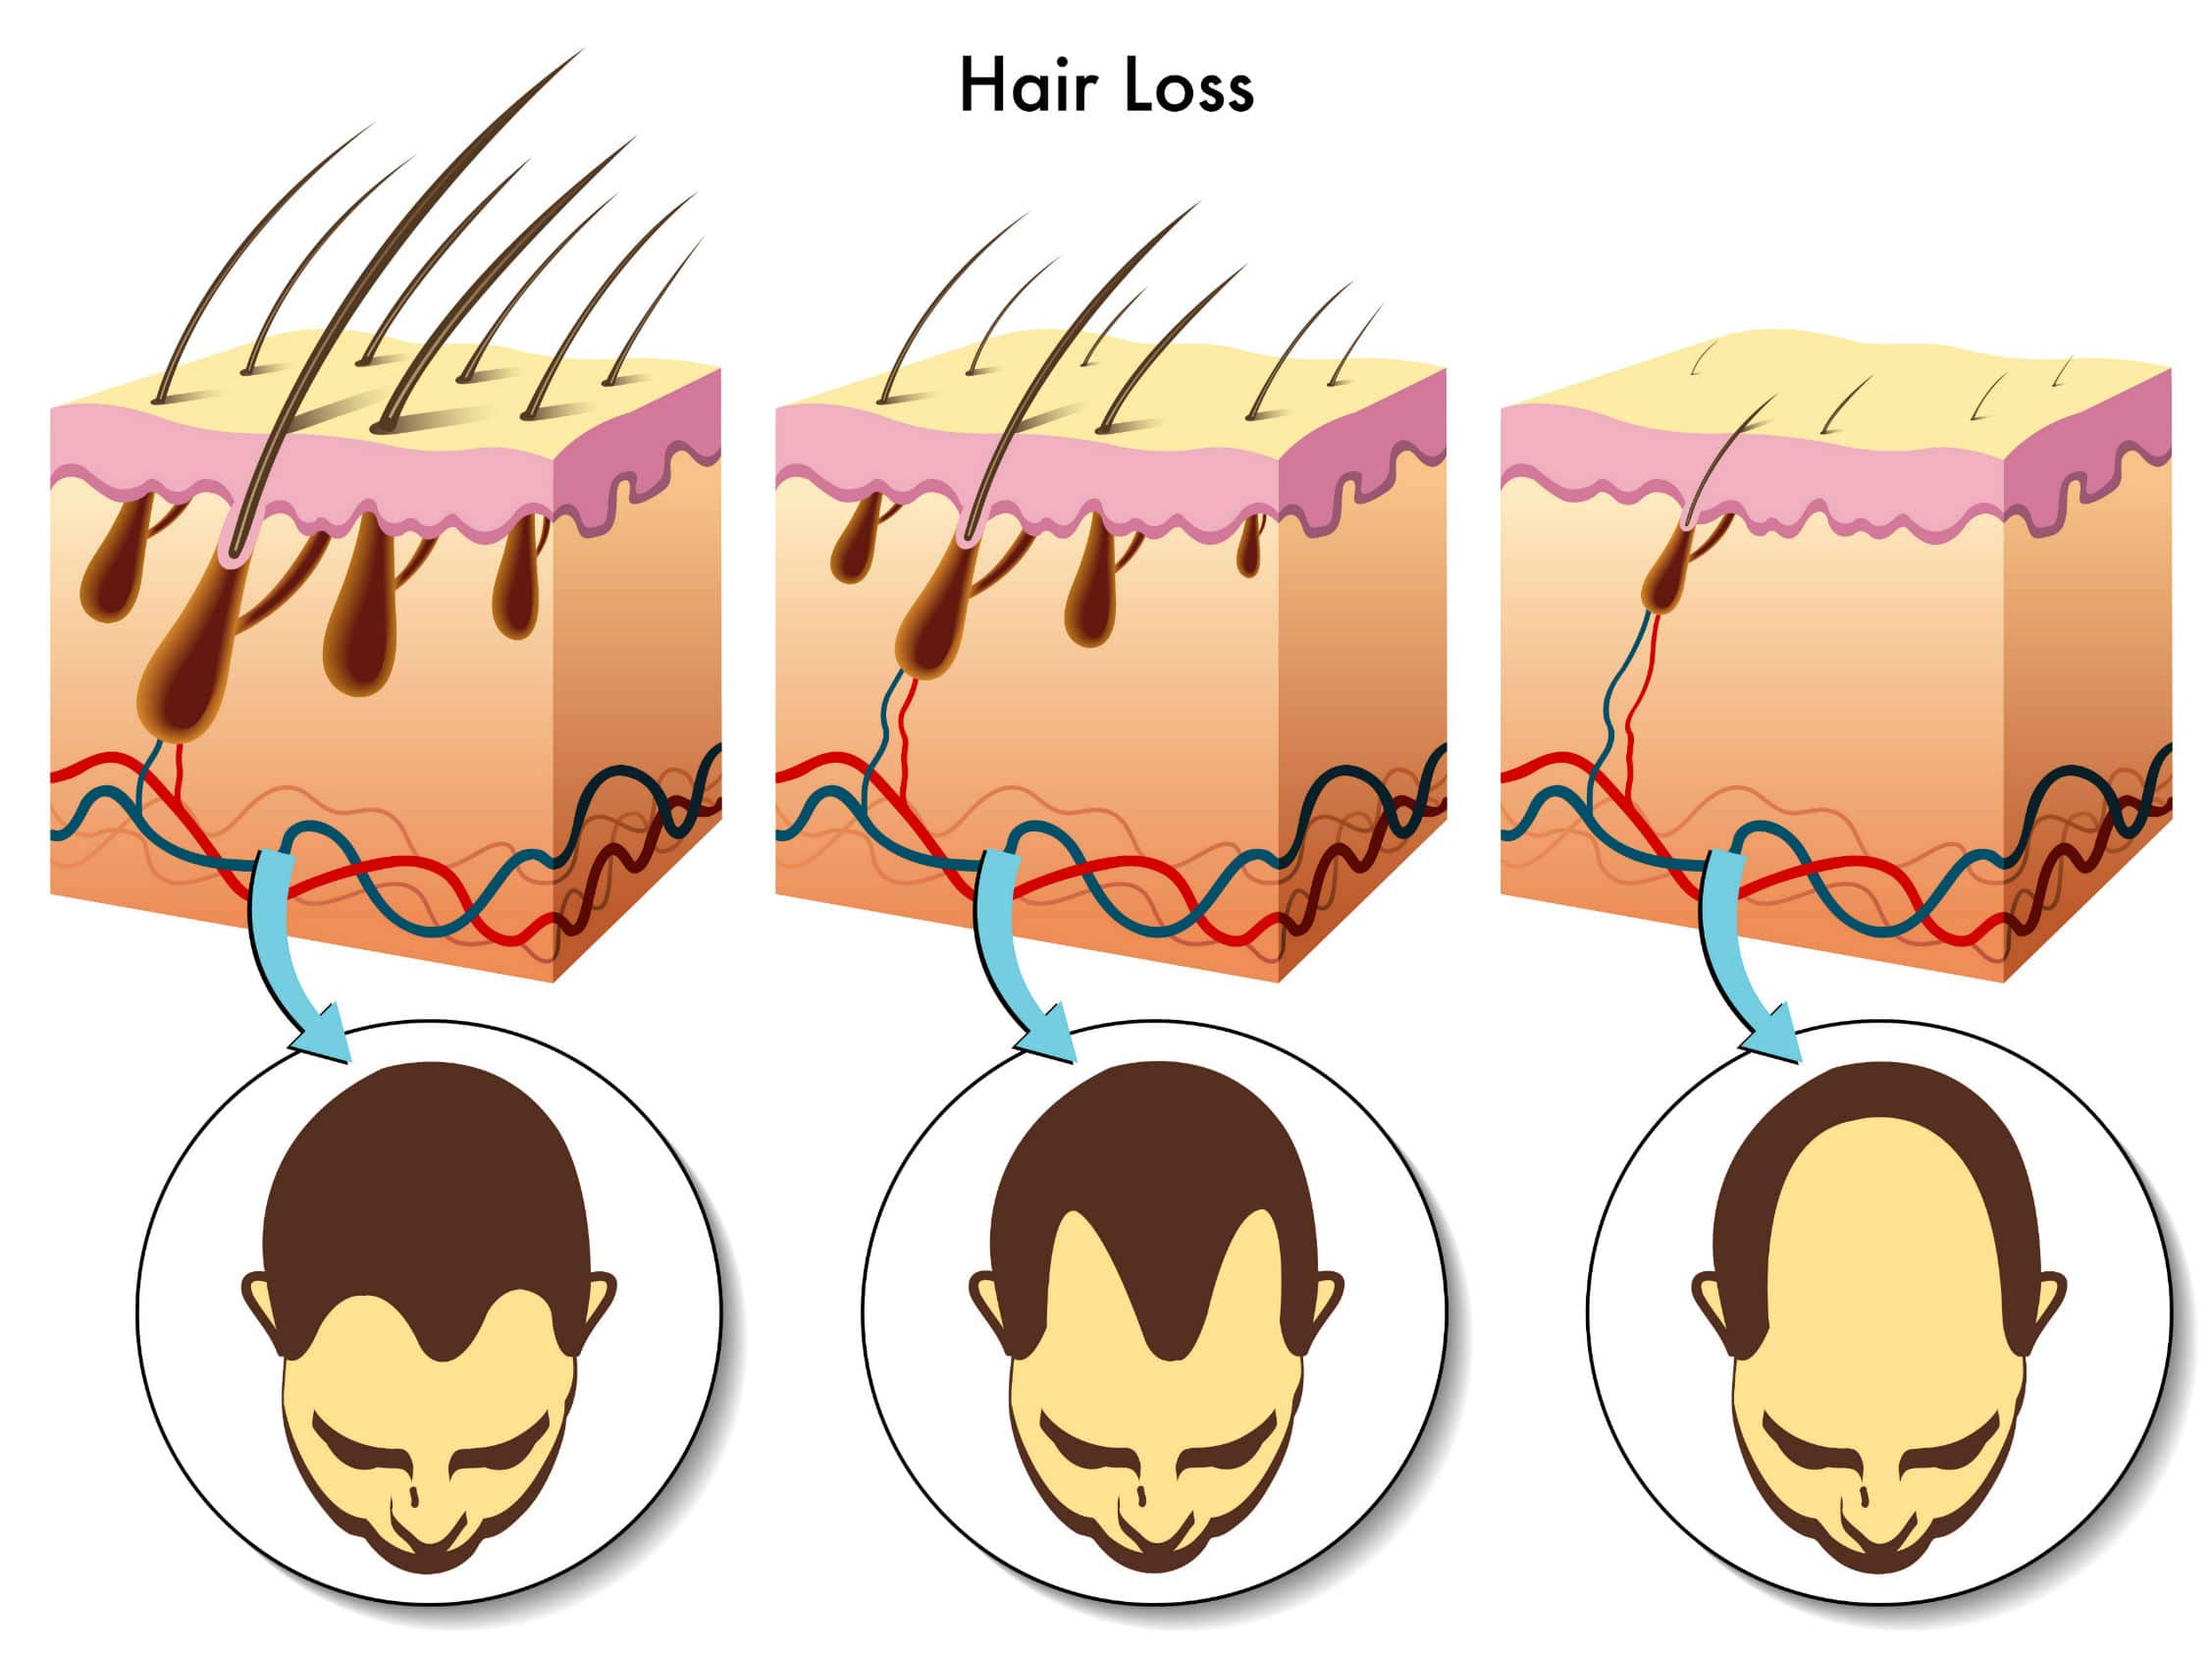 Infected Hair Follicles Treatment To Prevent And Stop Hair Loss